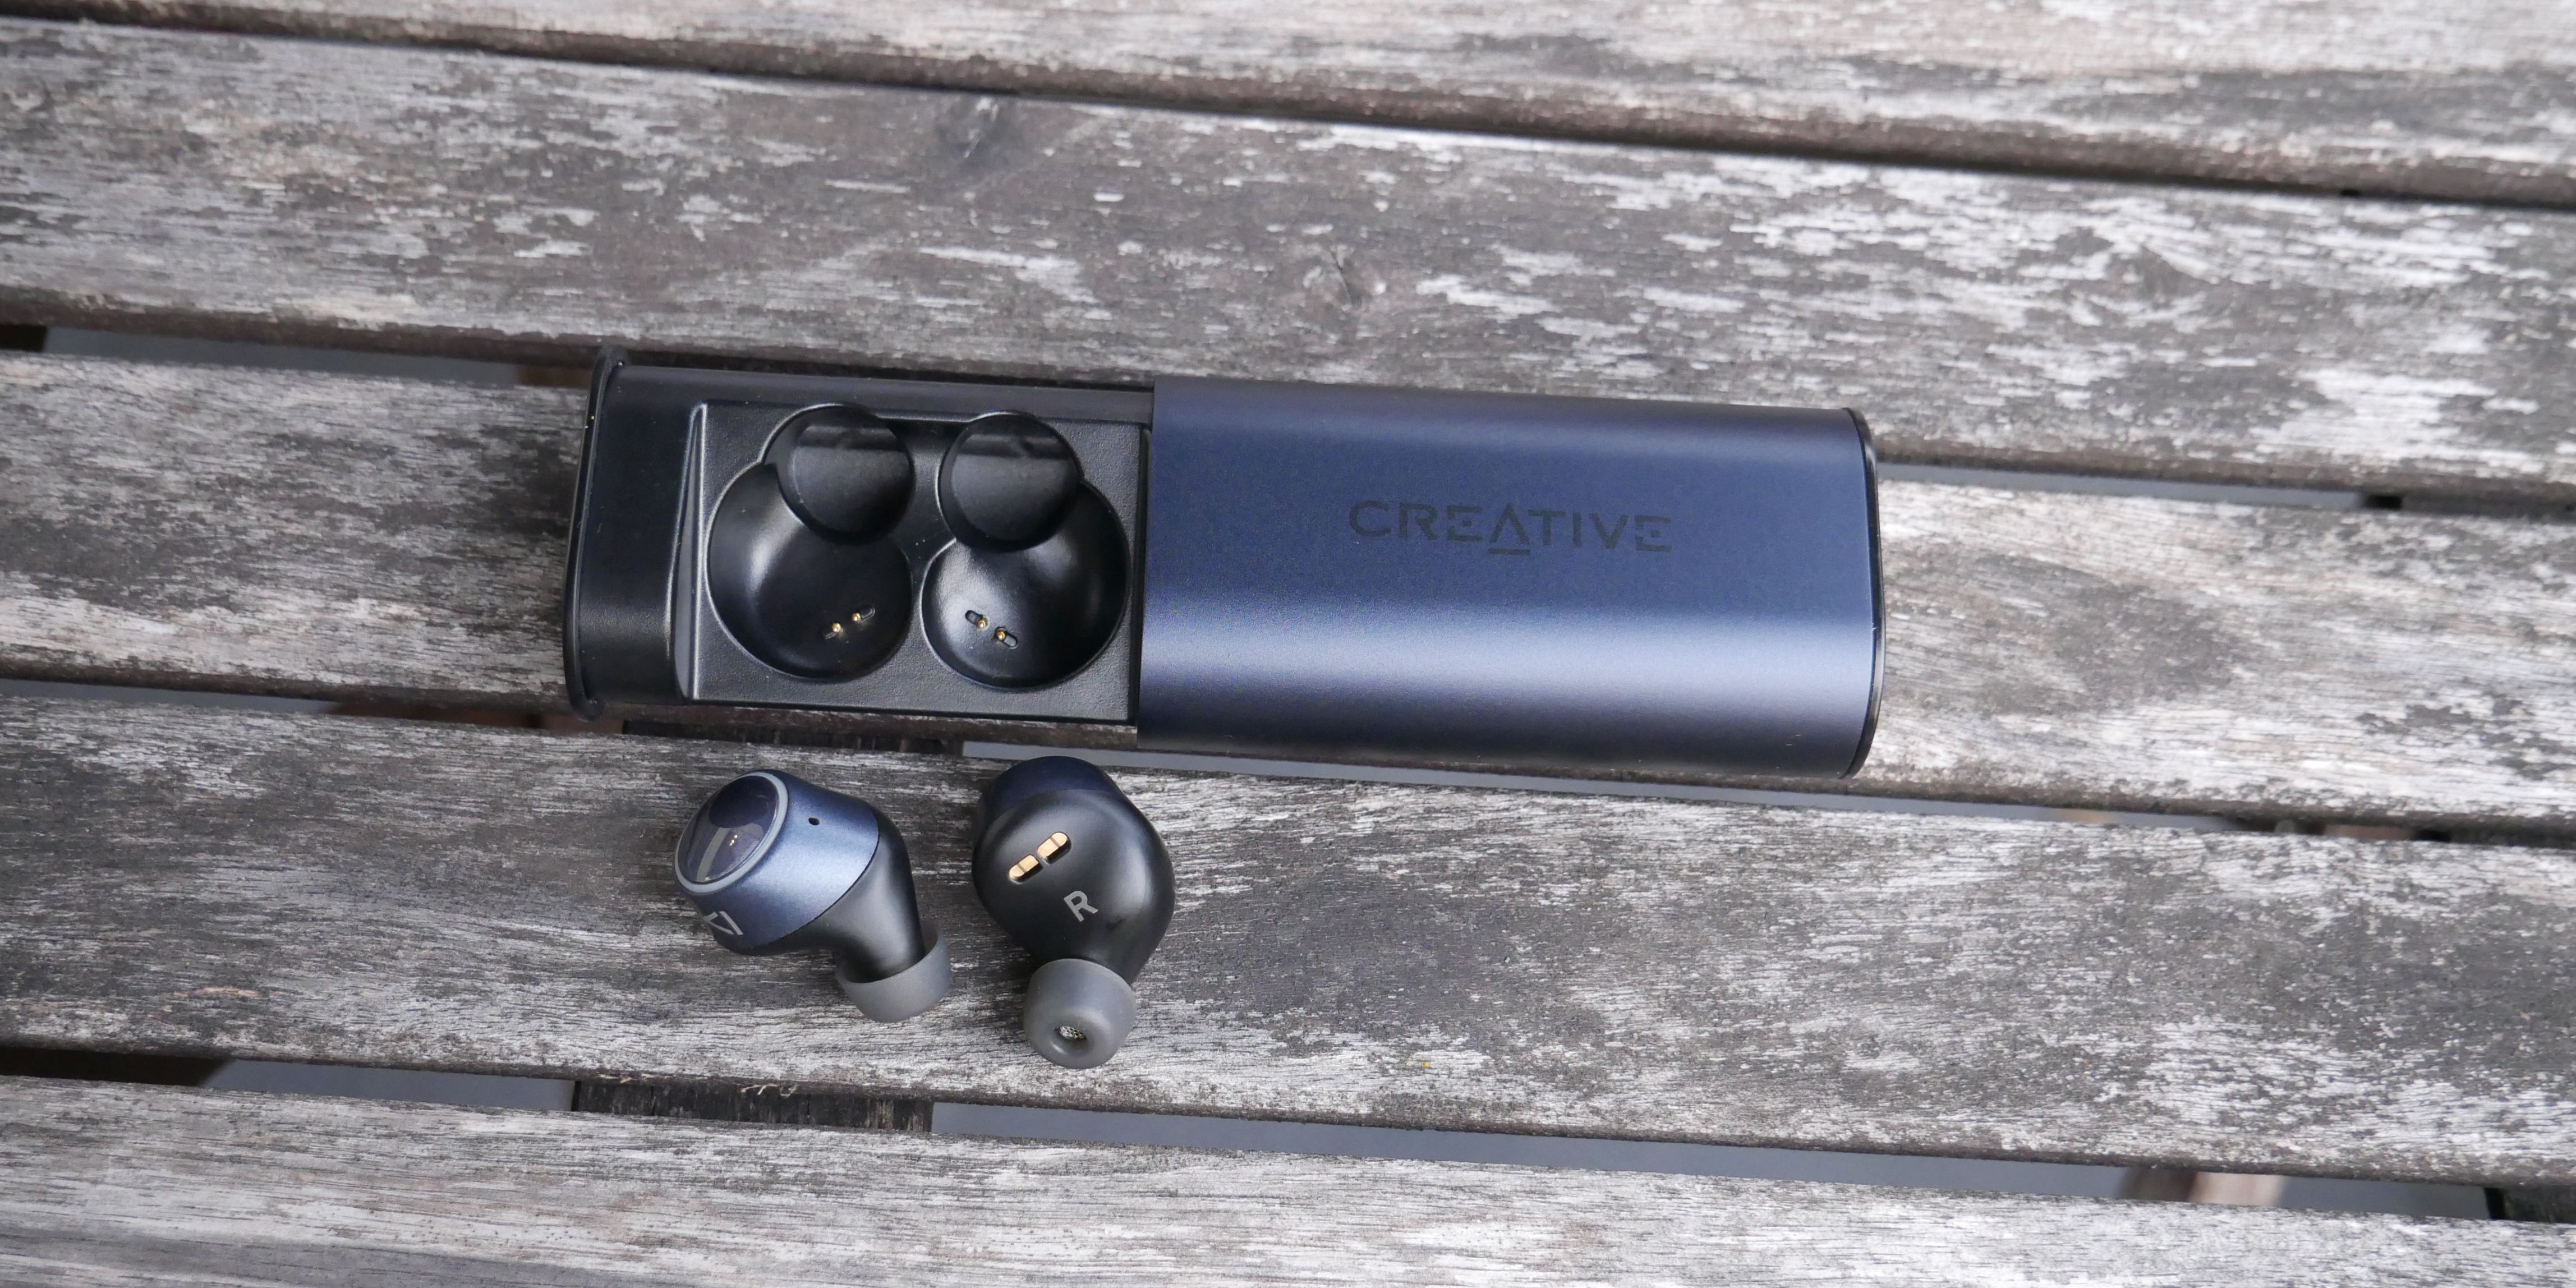 Creative Outlier Air V2 charging case and earbuds